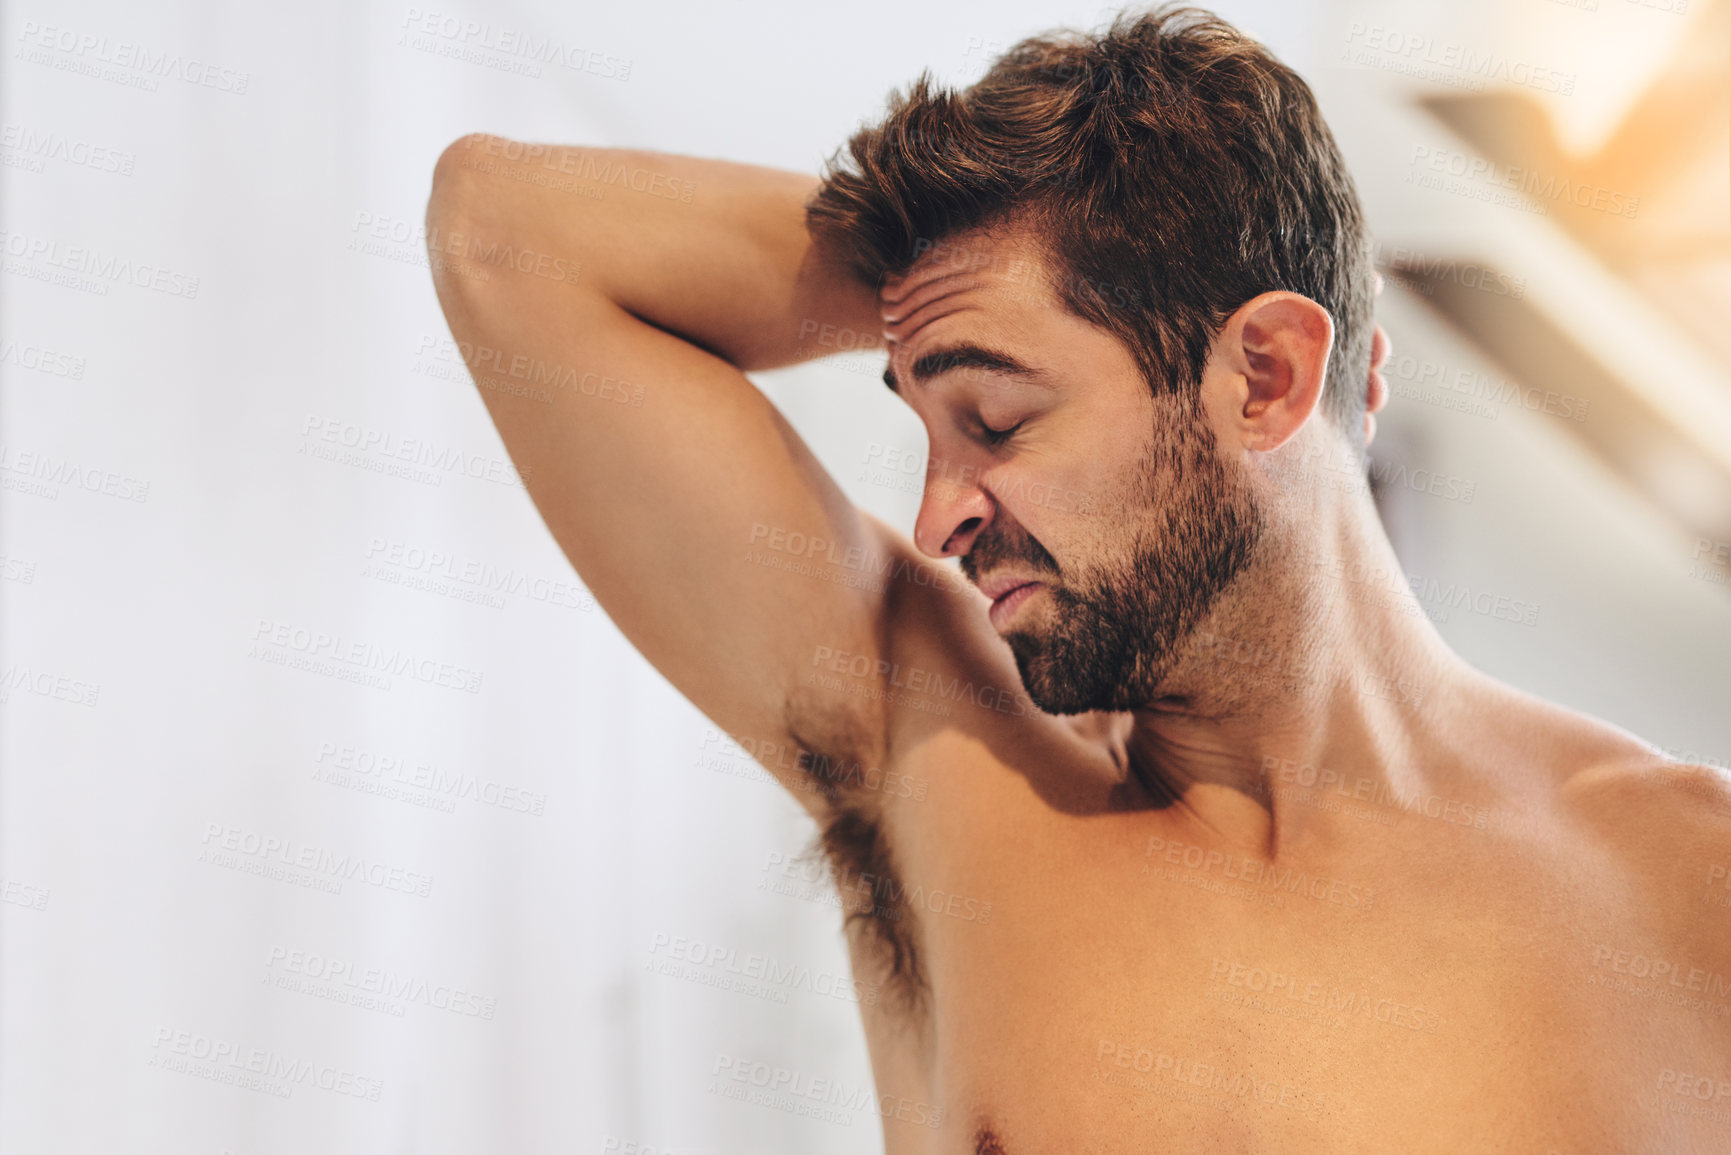 Buy stock photo Cropped shot of a handsome young man smelling his armpits while standing in his bathroom at home